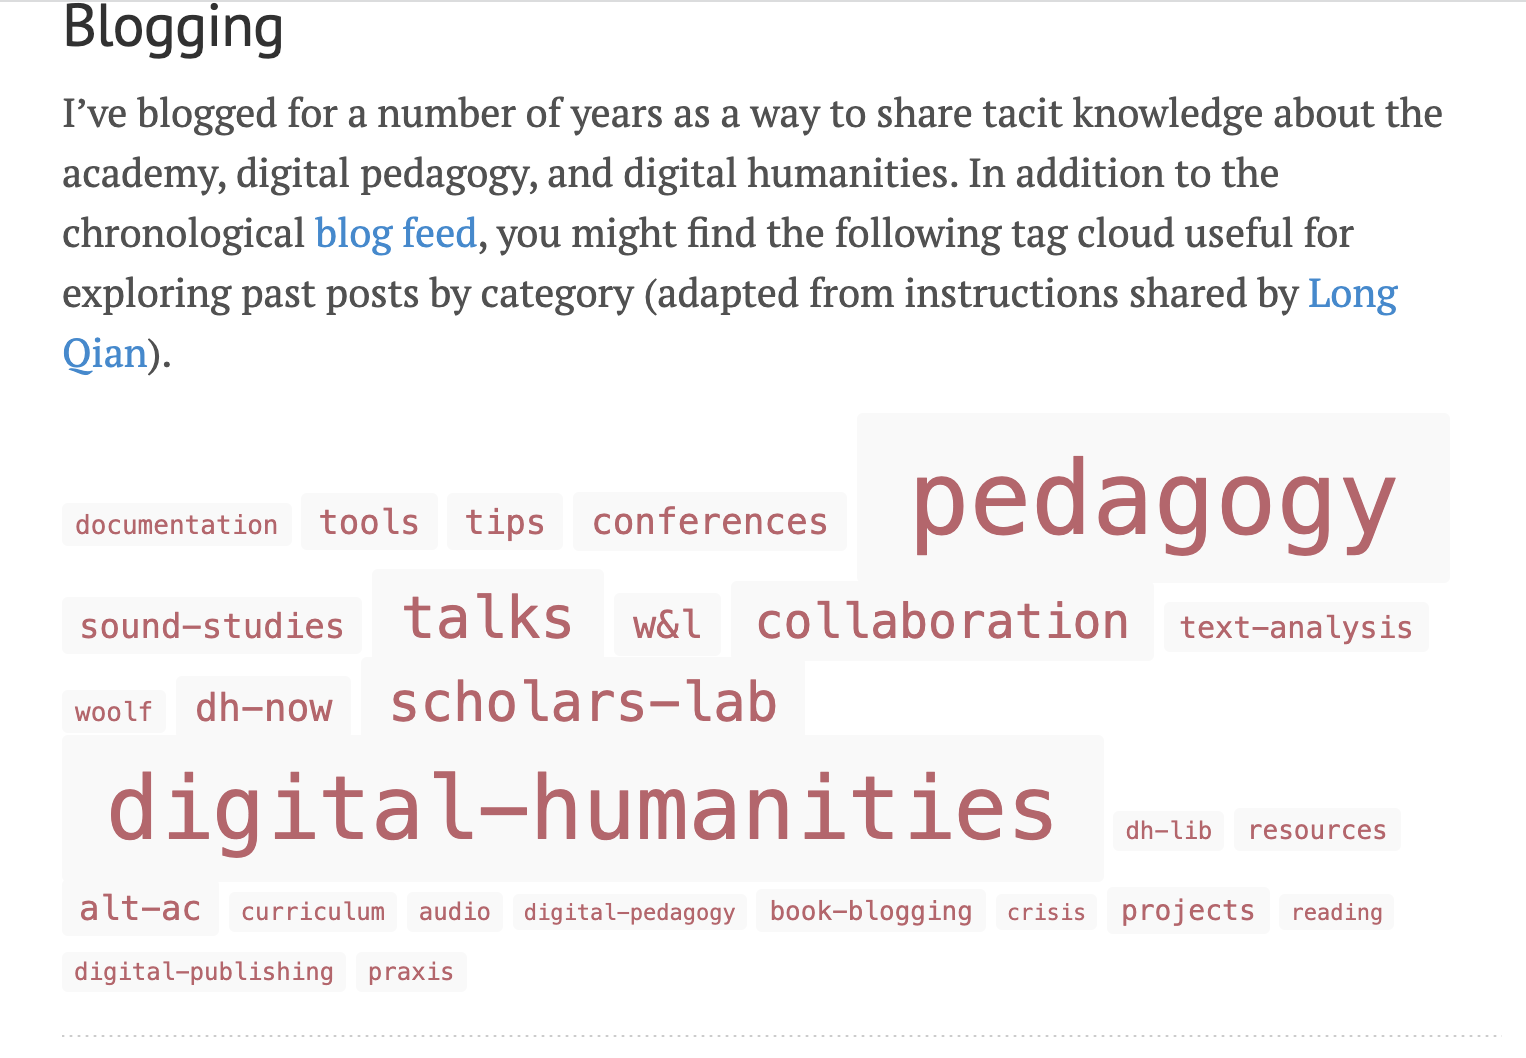 tag cloud from projects page